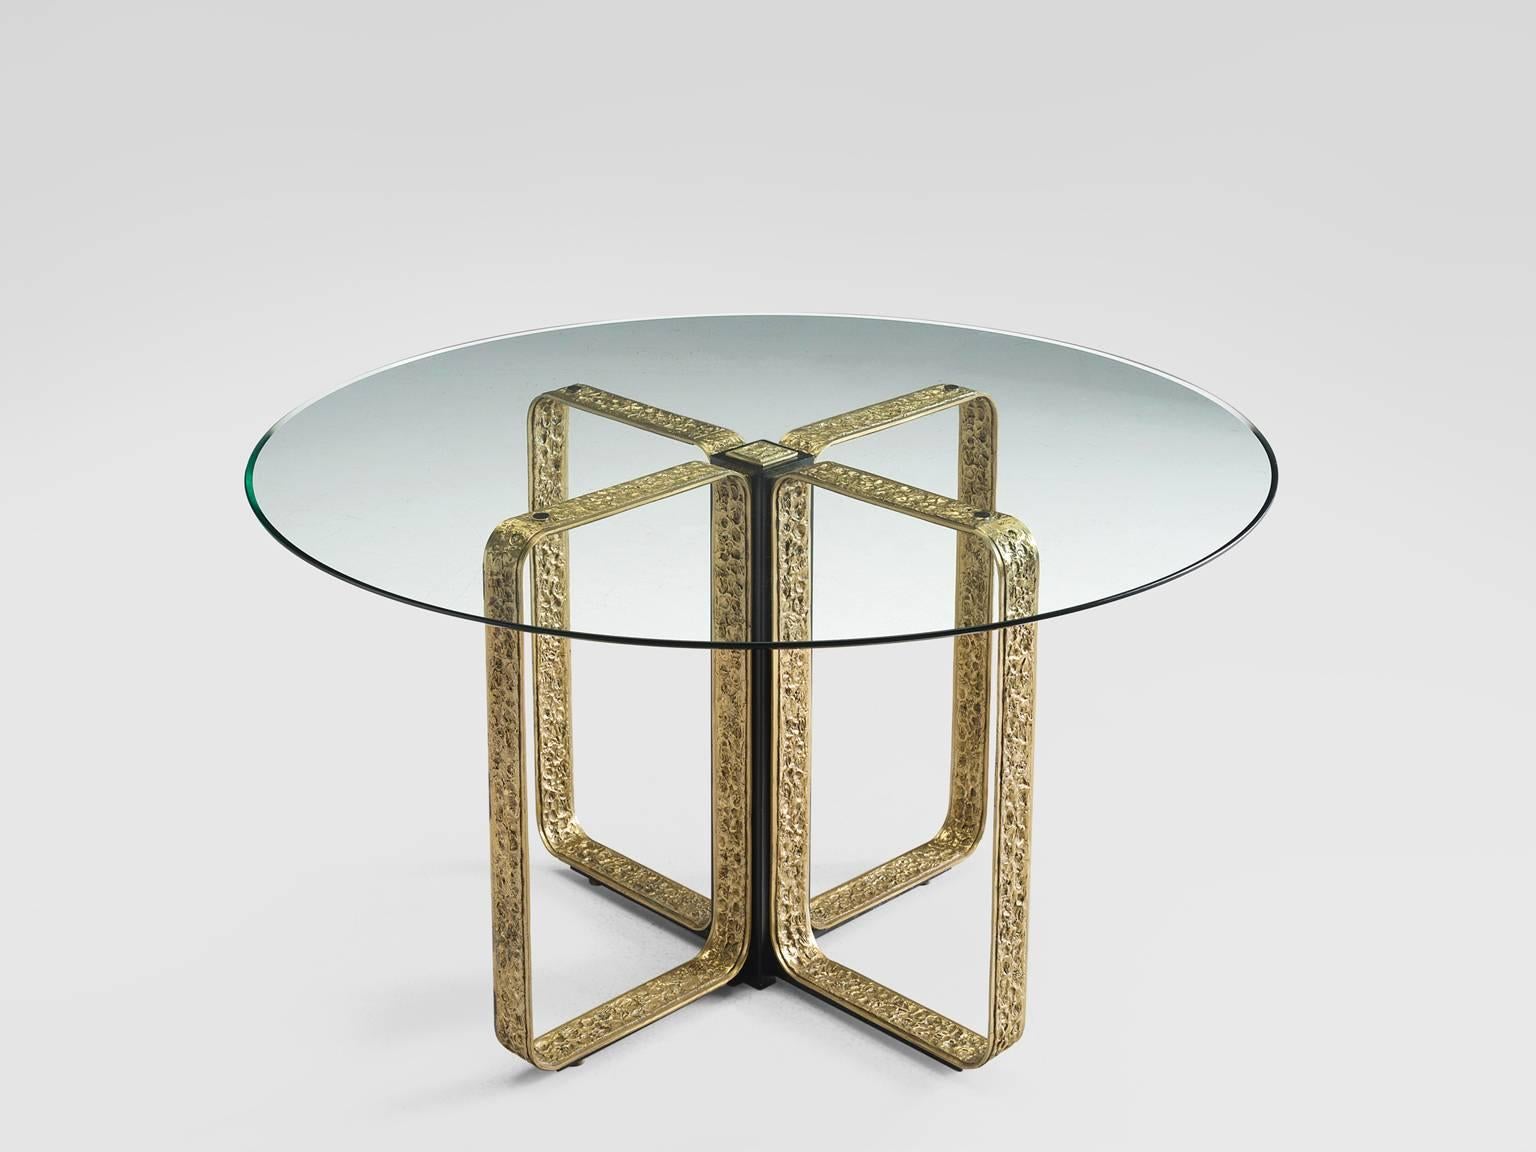 Angelo Brotto, side table, brass and glass, Italy, 1950s.

This table by Angelo is has a thick solid brass frame with four open brass frames. The tabletop is executed in clear glass. Angelo Brotto (1914-2002) was a designer who also made many